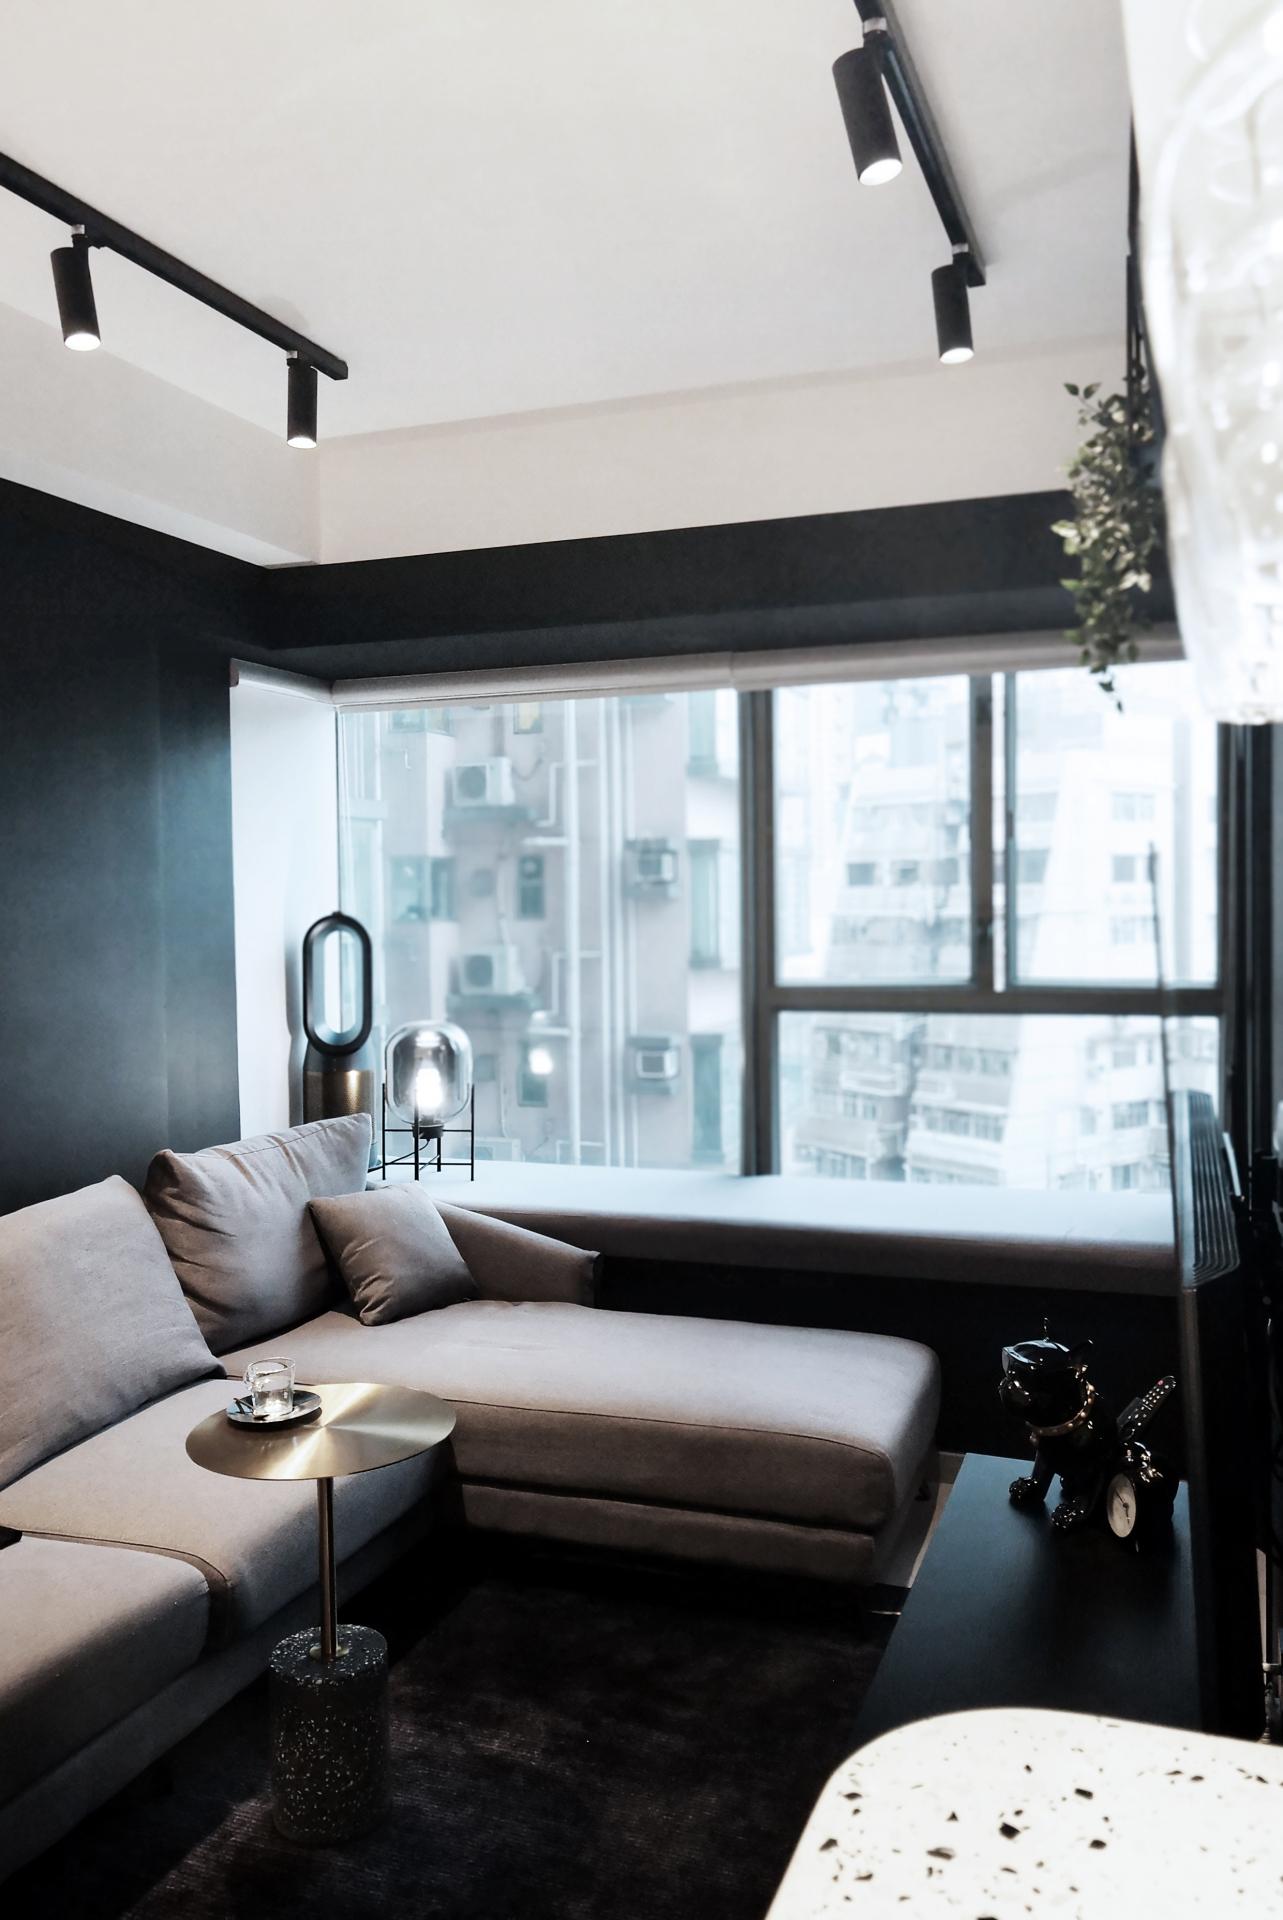 A Sleek Sheung Wan Apartment Furnished in Contrasting Black and White Tones